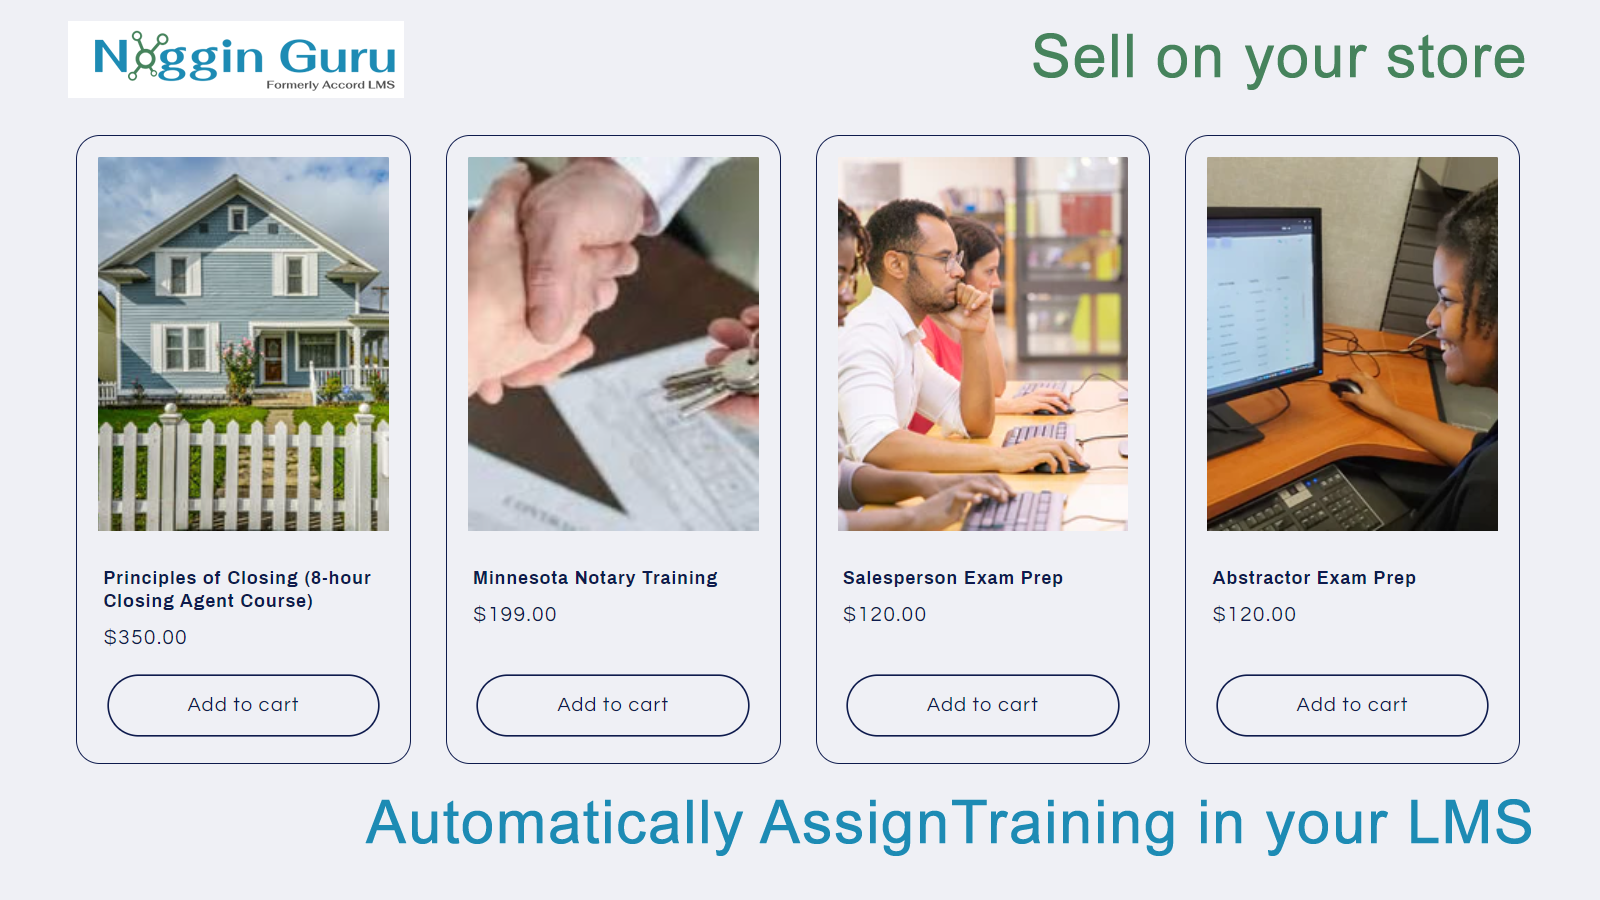 Online Products automatically become LMS Assignments on purchase